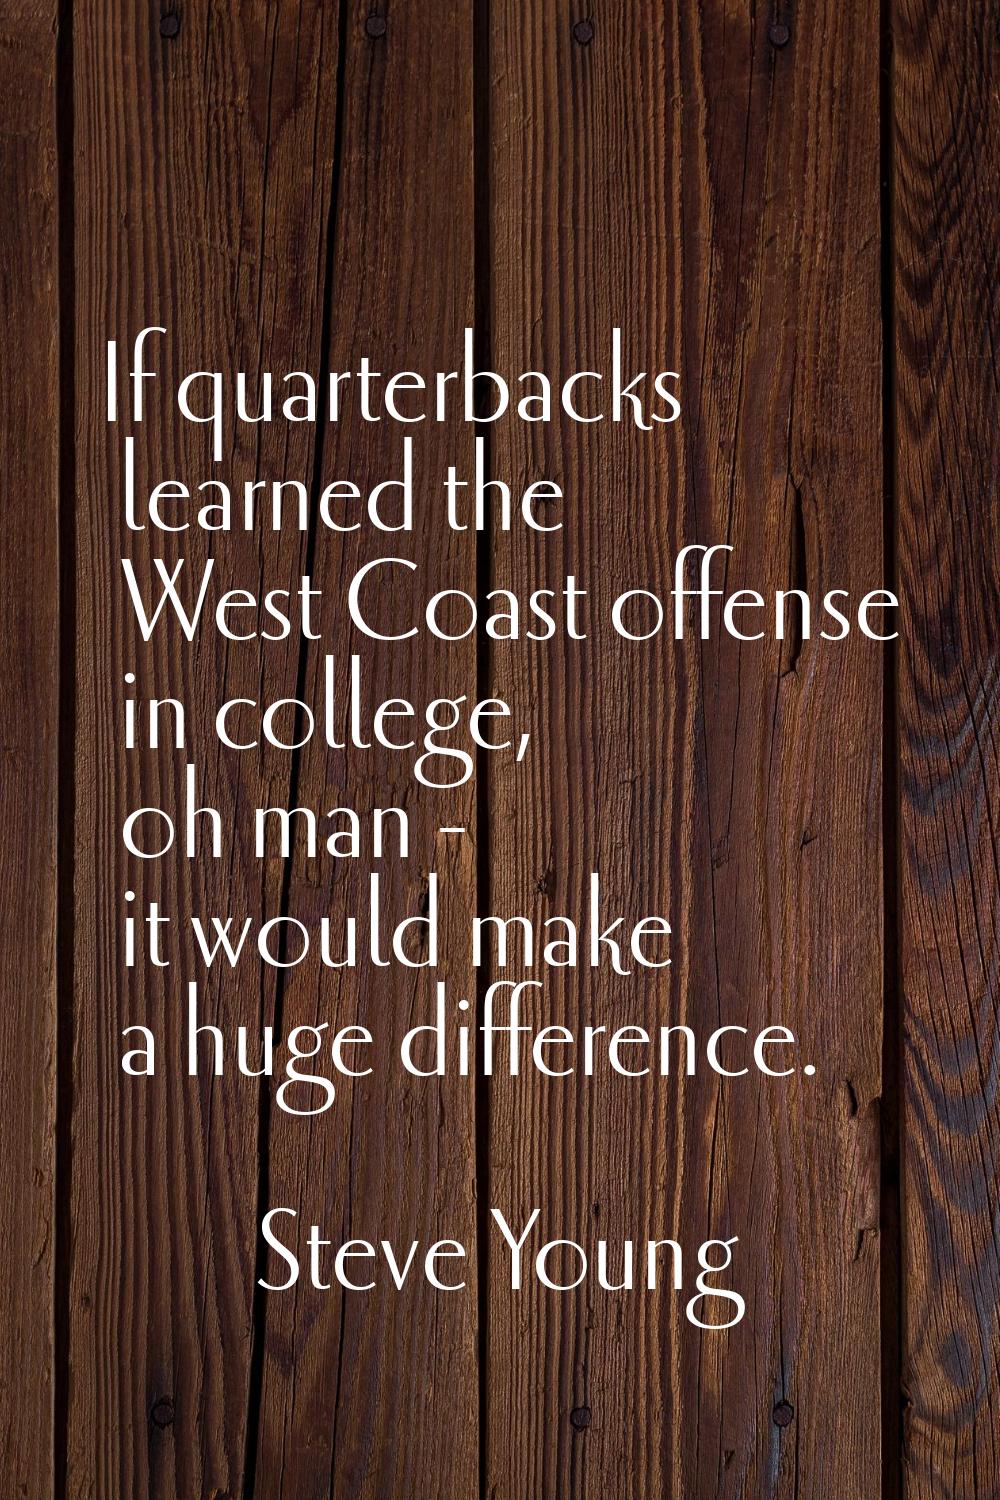 If quarterbacks learned the West Coast offense in college, oh man - it would make a huge difference